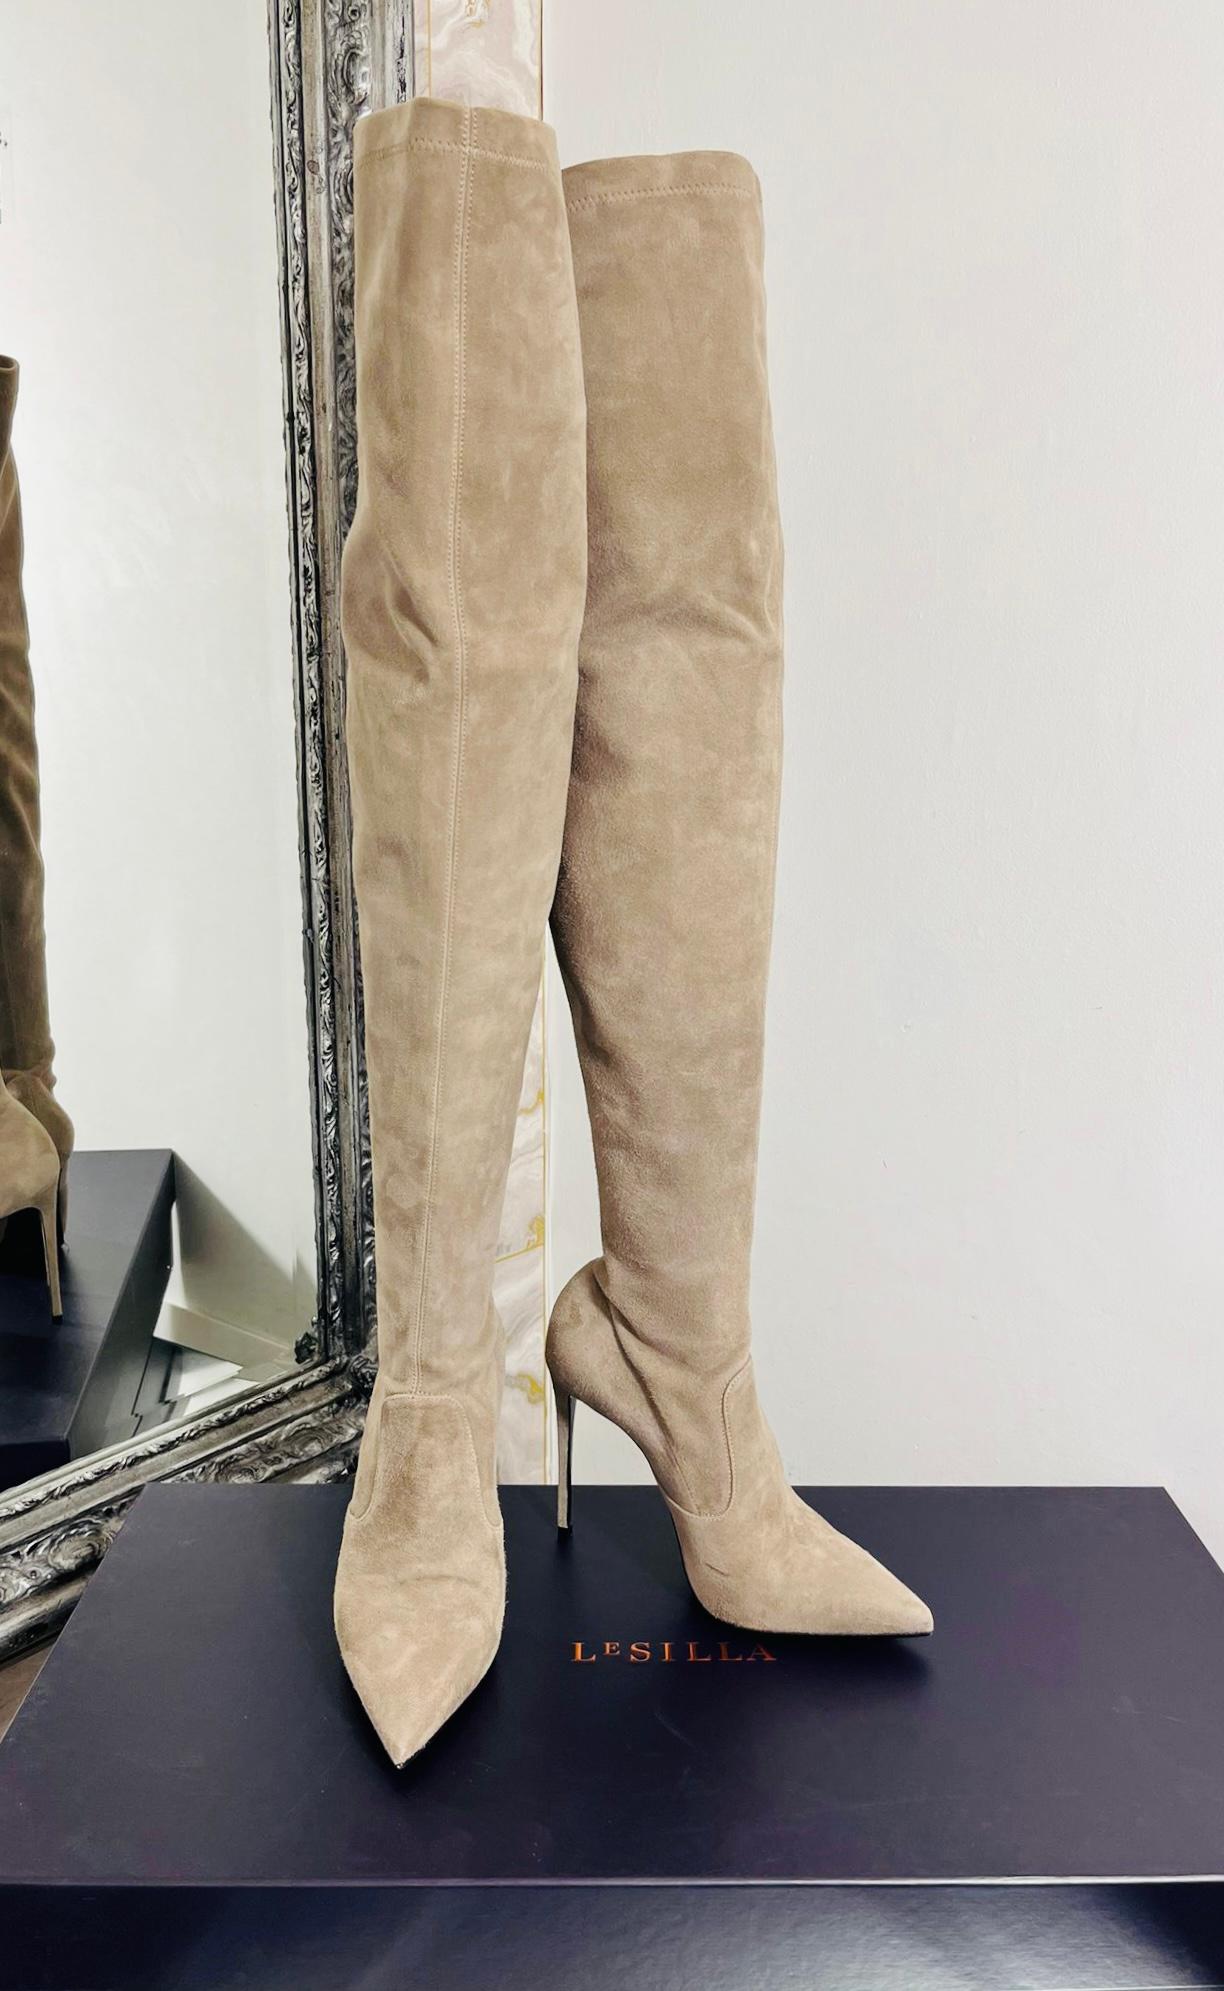 Le Silla Thigh-High Suede Boots

Beige, heeled 'Eva' boots designed with stretch, pull-on style.

Detailed with pointed toe and high stiletto heel.

Size – 36

Condition – Excellent/Brand New

Composition – Suede

Comes with – Box